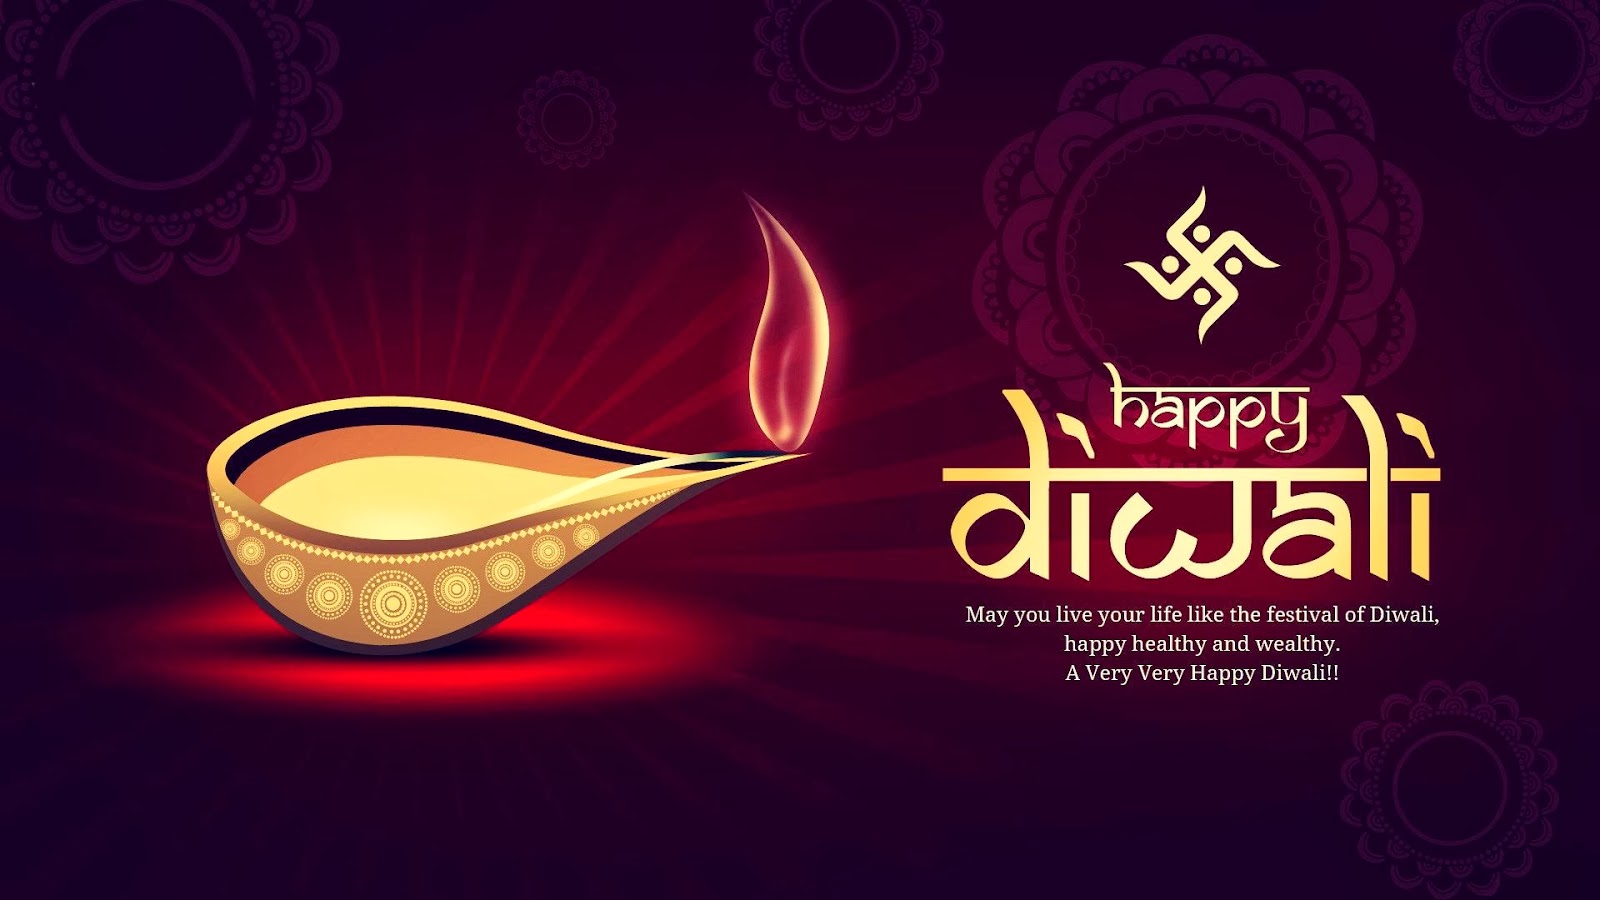 Happy Diwali Images in Hindi Wishes Quotes messages photos video status whatsapp DP HD FREE Download